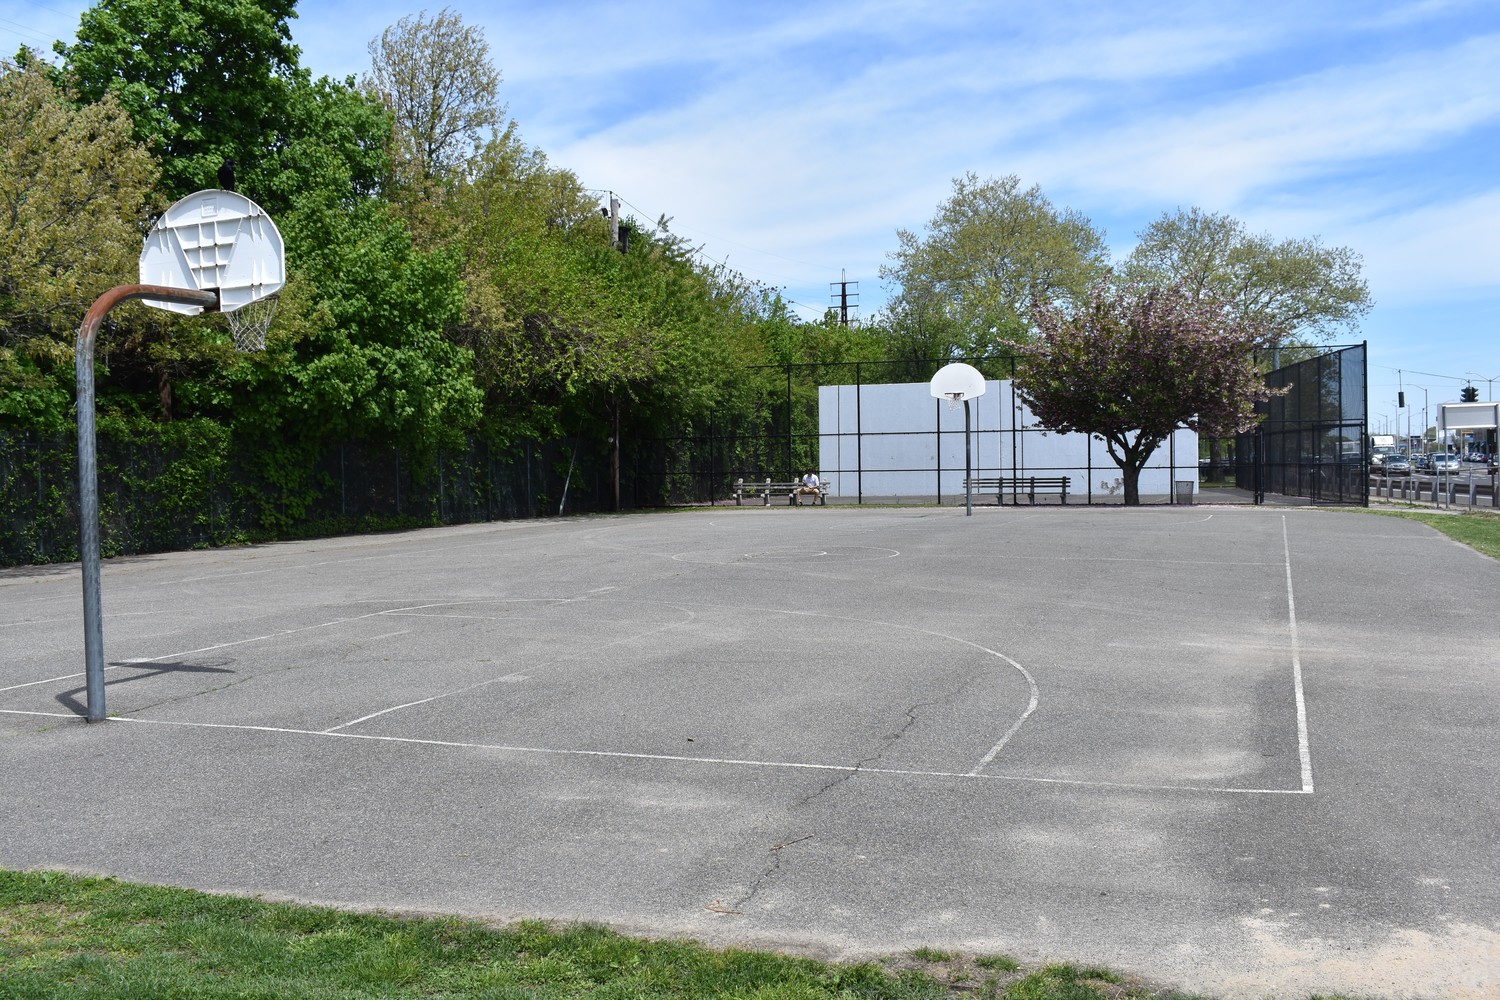 The playground would replace the basketball and handball courts that currently occupy the space.